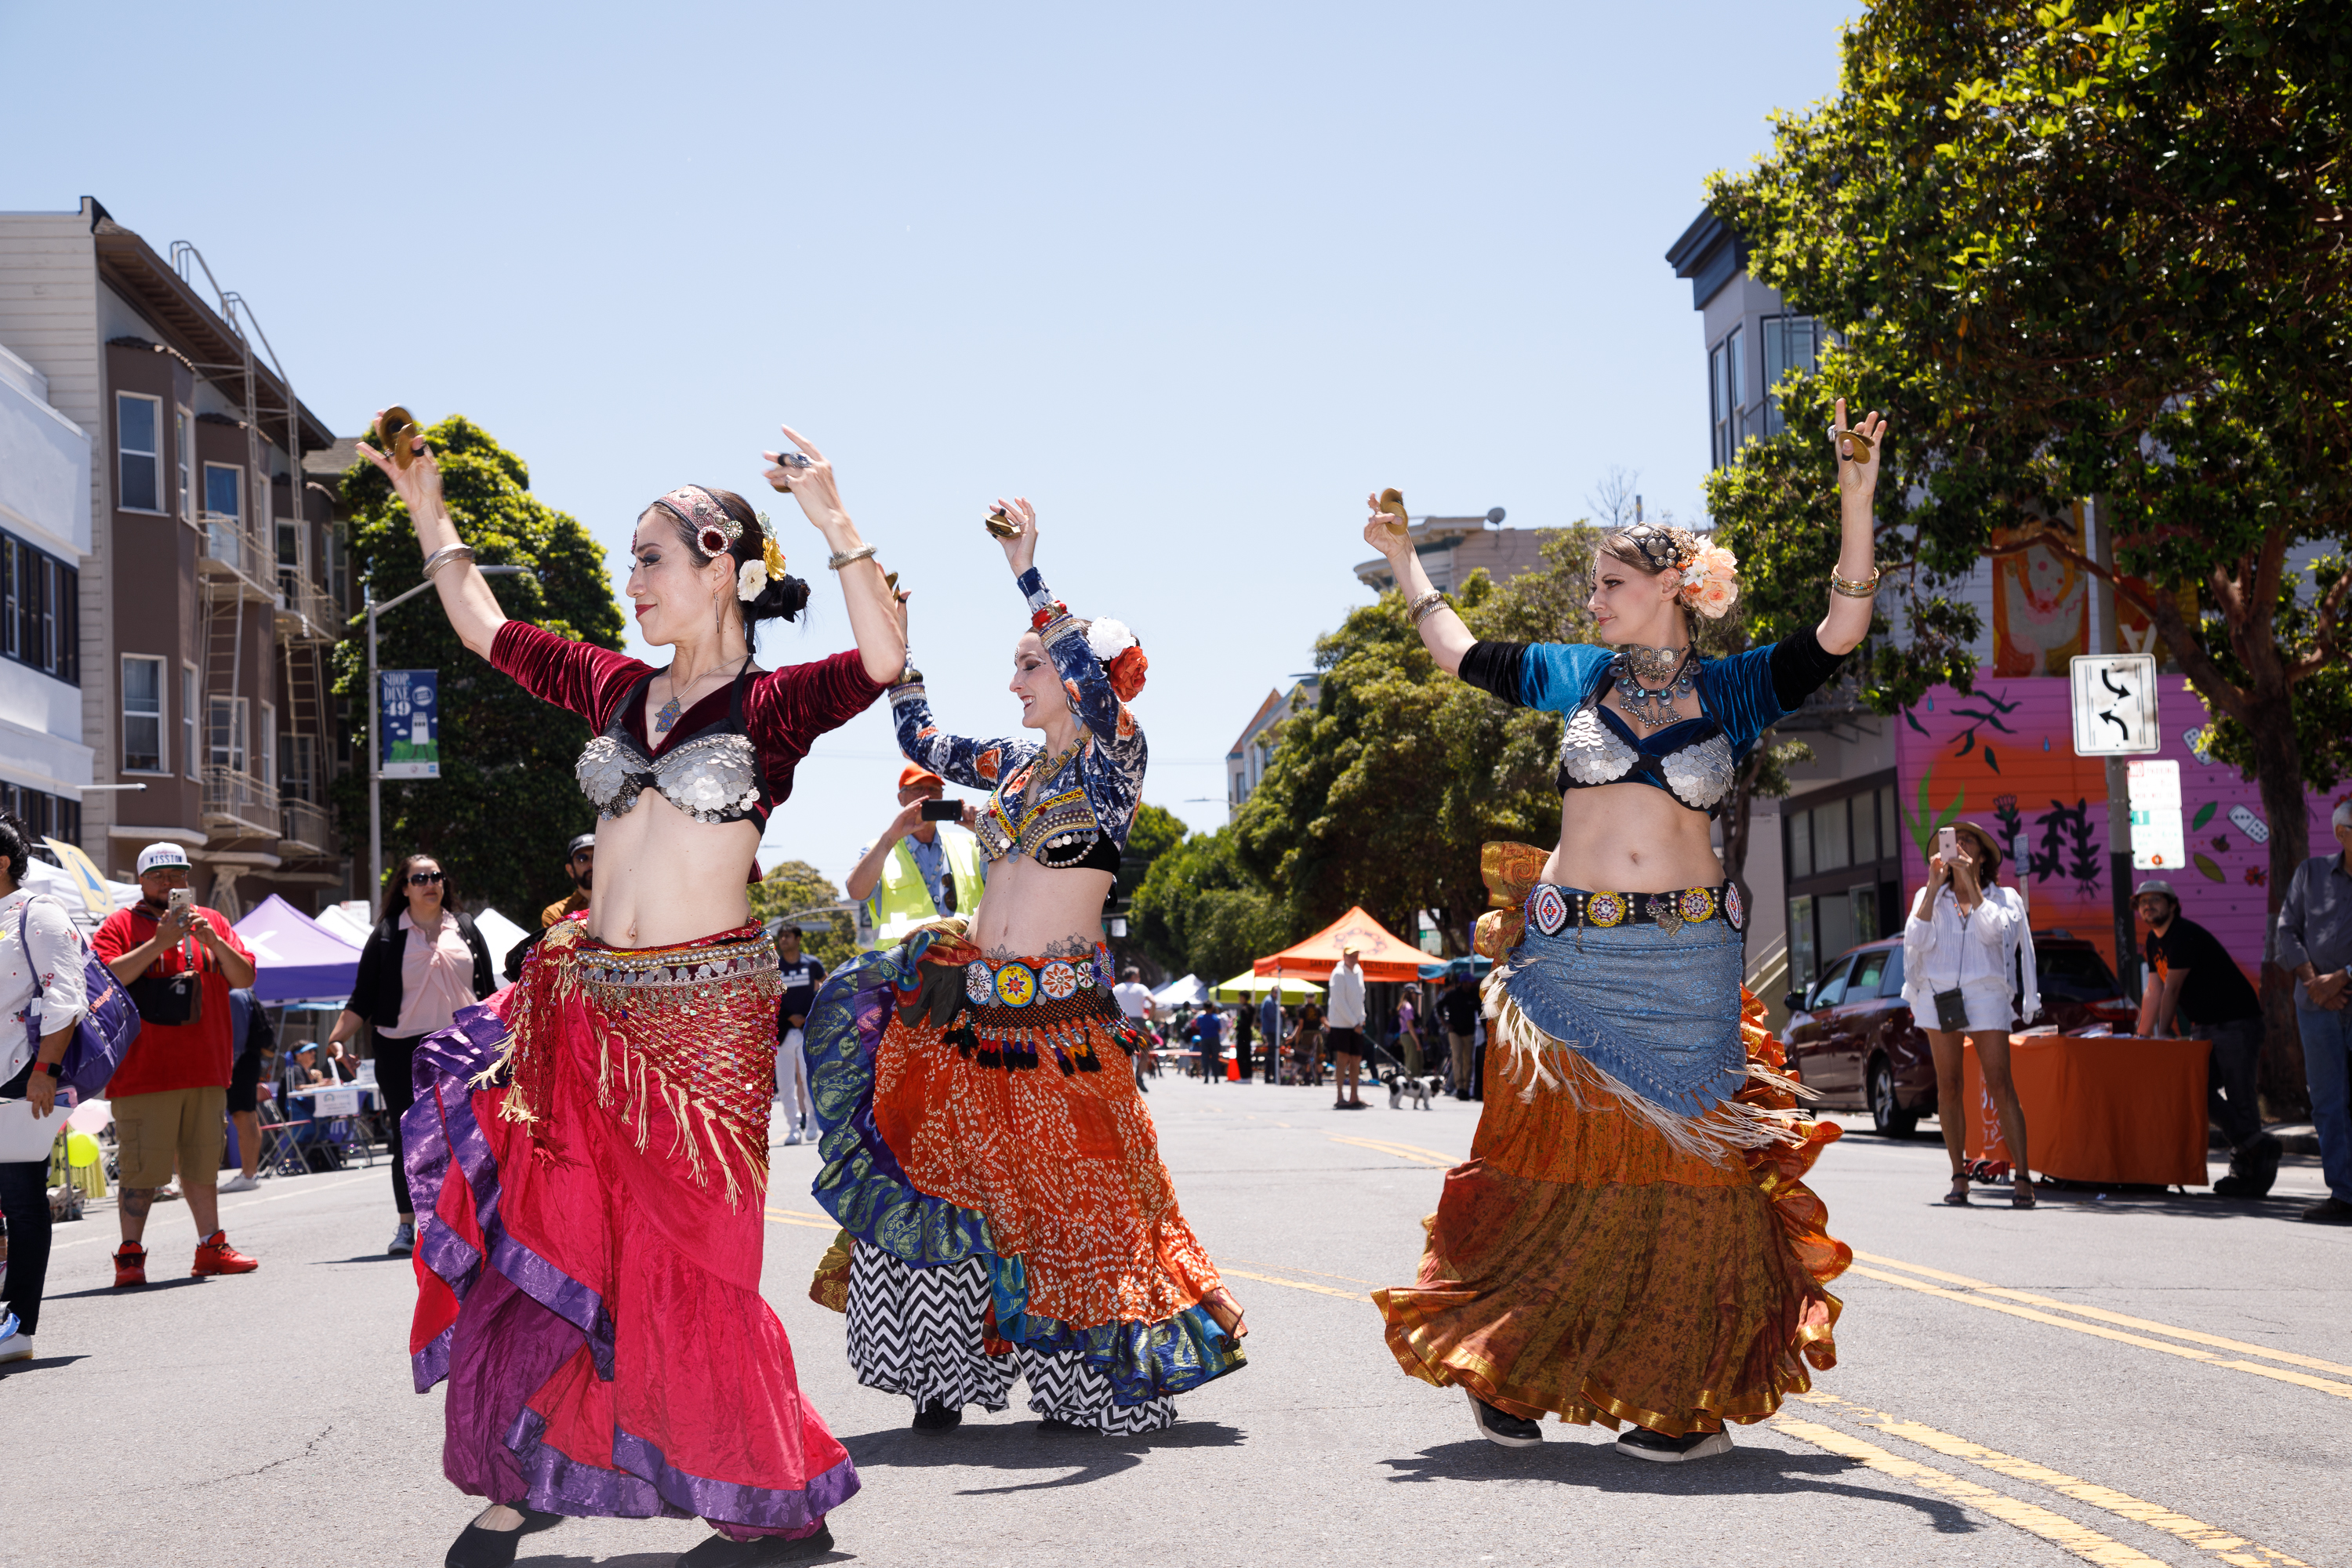 Three dancers in colorful costumes perform on a sunny street with onlookers in the background.